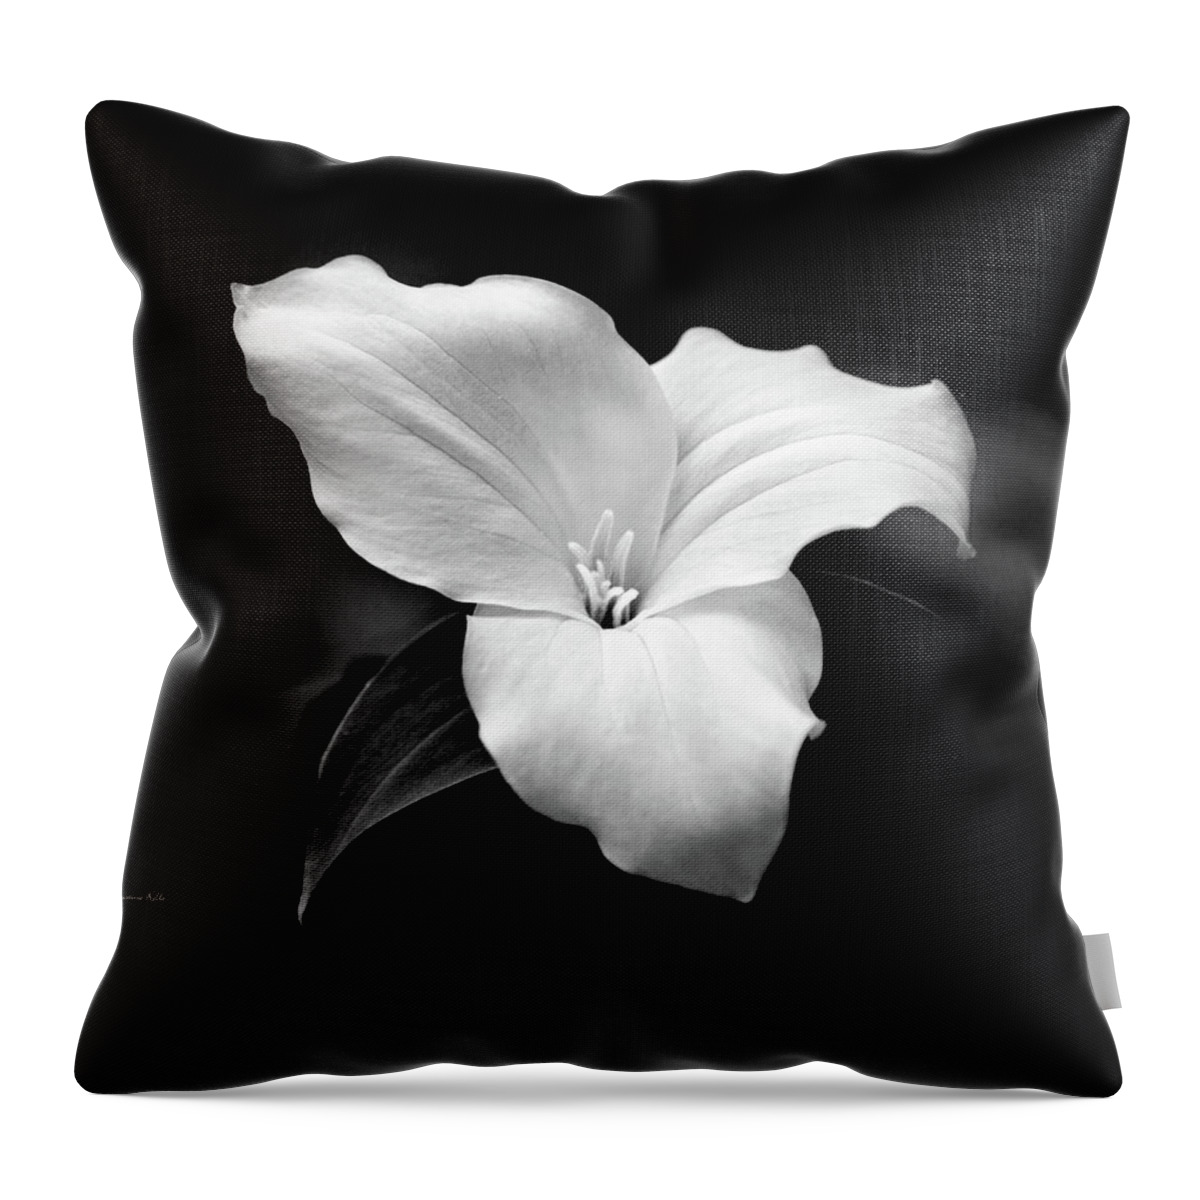 Black And White Throw Pillow featuring the photograph Trillium Flower Black and White by Christina Rollo